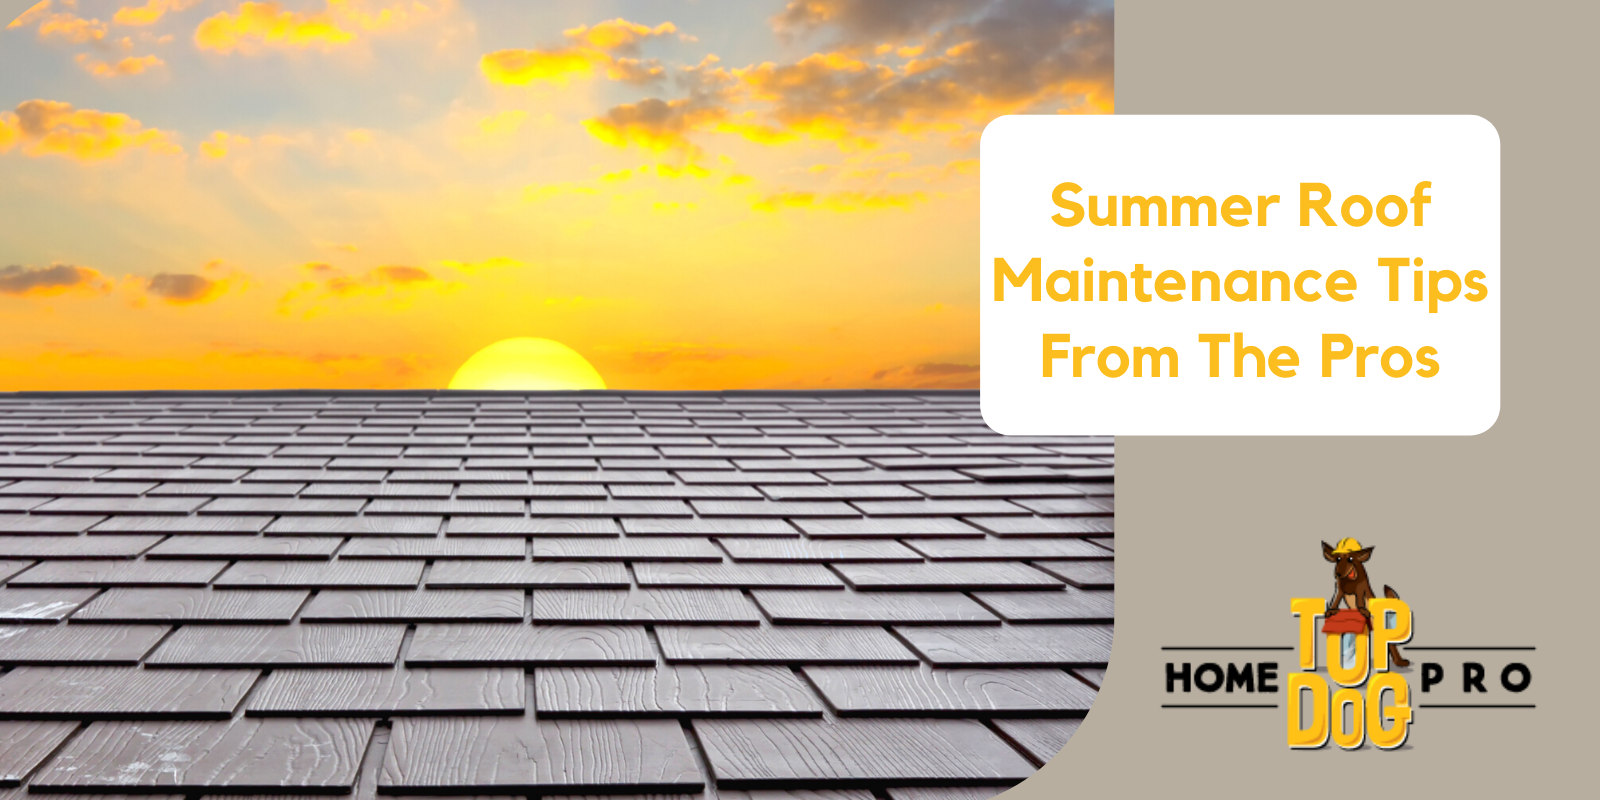 5 Roofing Maintenance Tips: Get Your Home Summer Ready